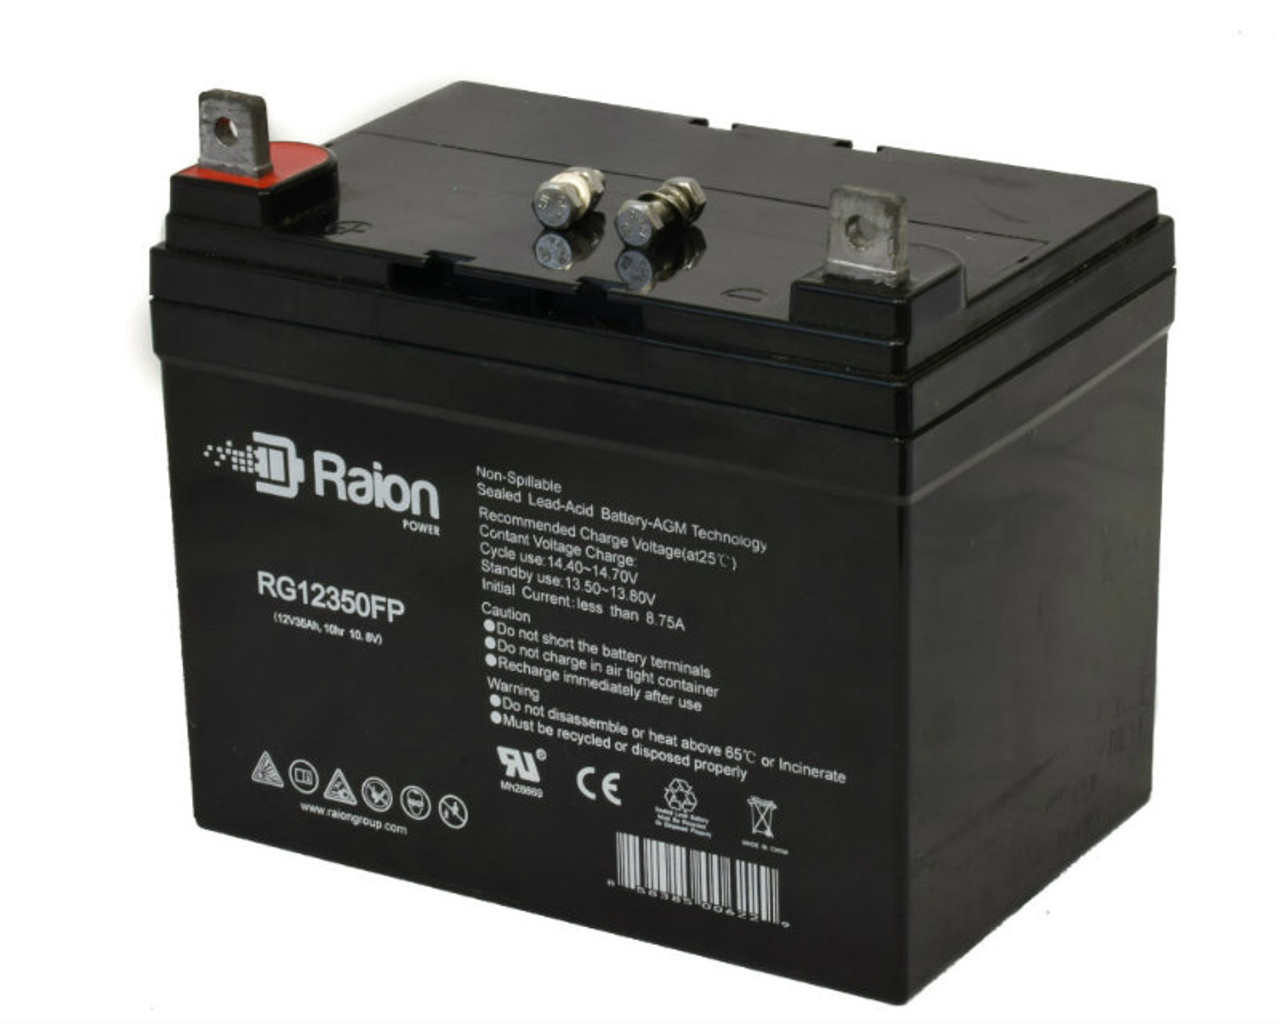 Raion Power Replacement 12V 35Ah Battery for CGB CB12330 - 1 Pack